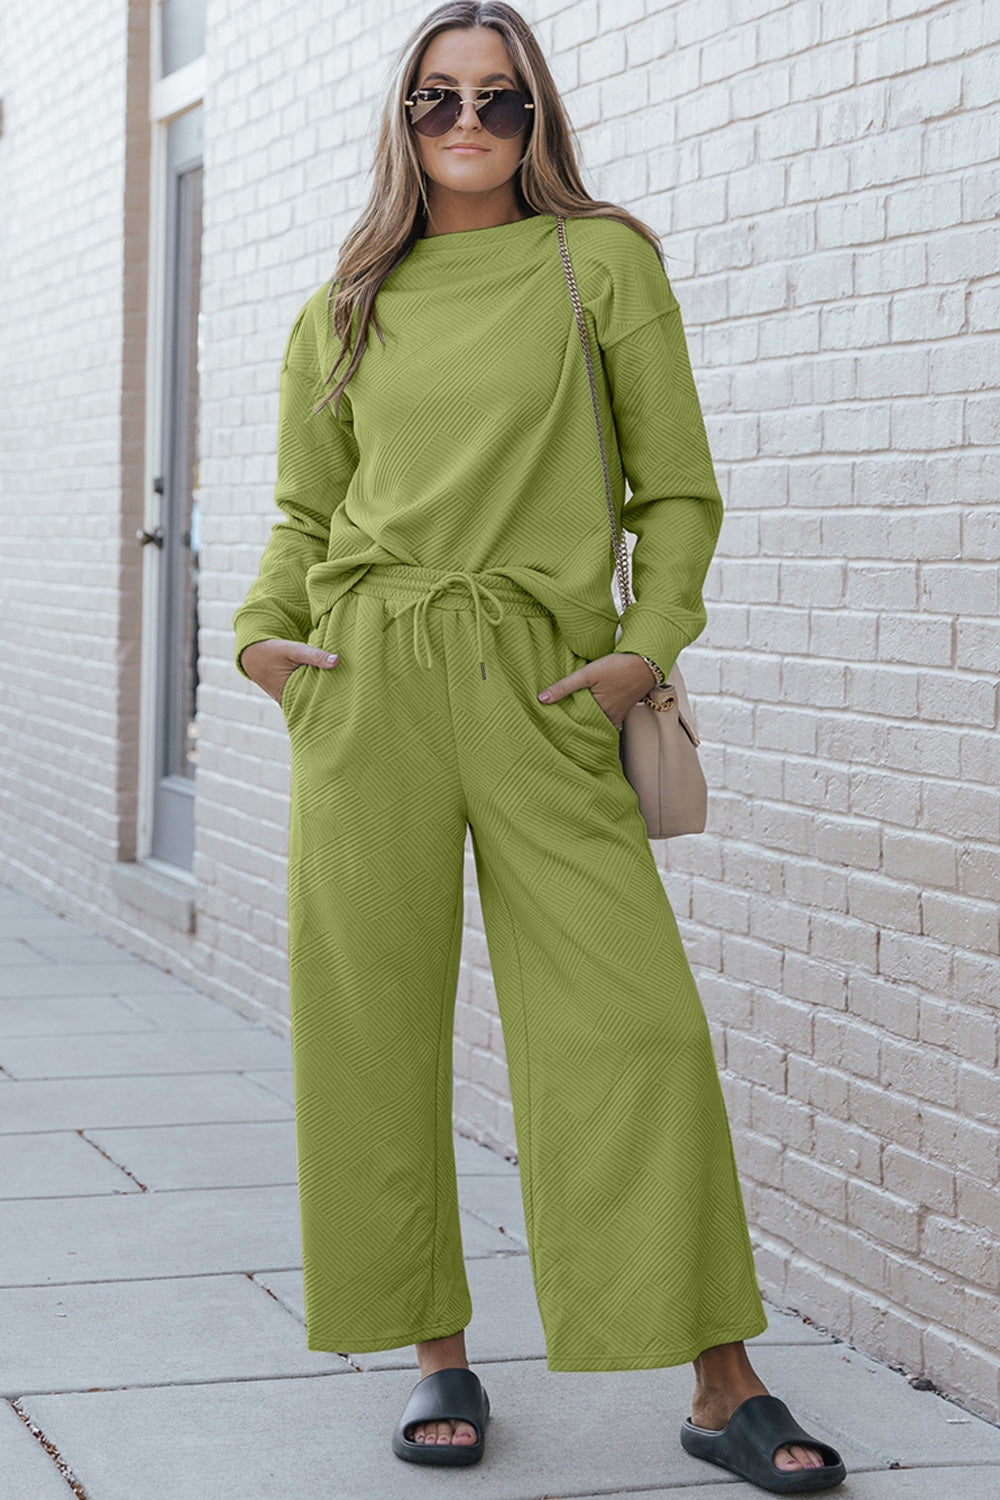 Double Take Full Size Textured Long Sleeve Top and Drawstring Pants Set Chartreuse L 